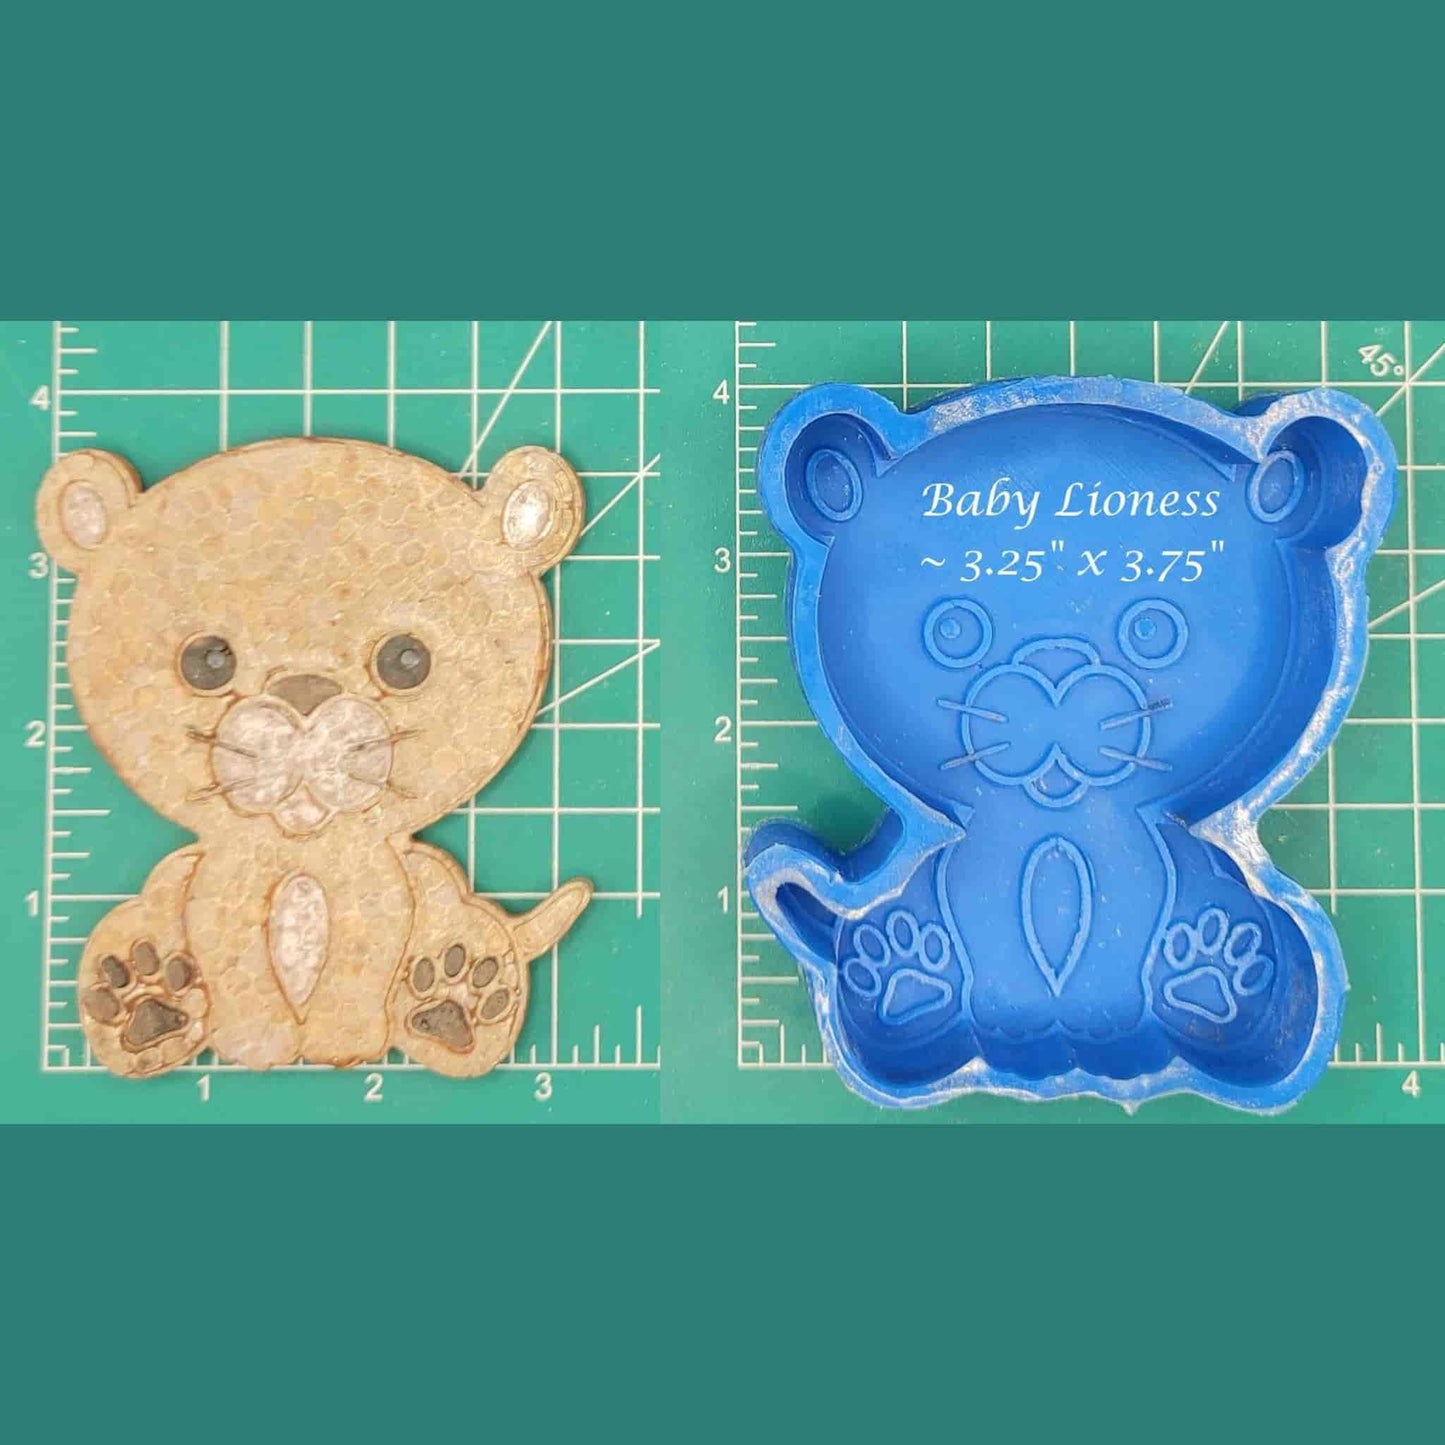 Baby Lioness - Silicone Freshie Mold